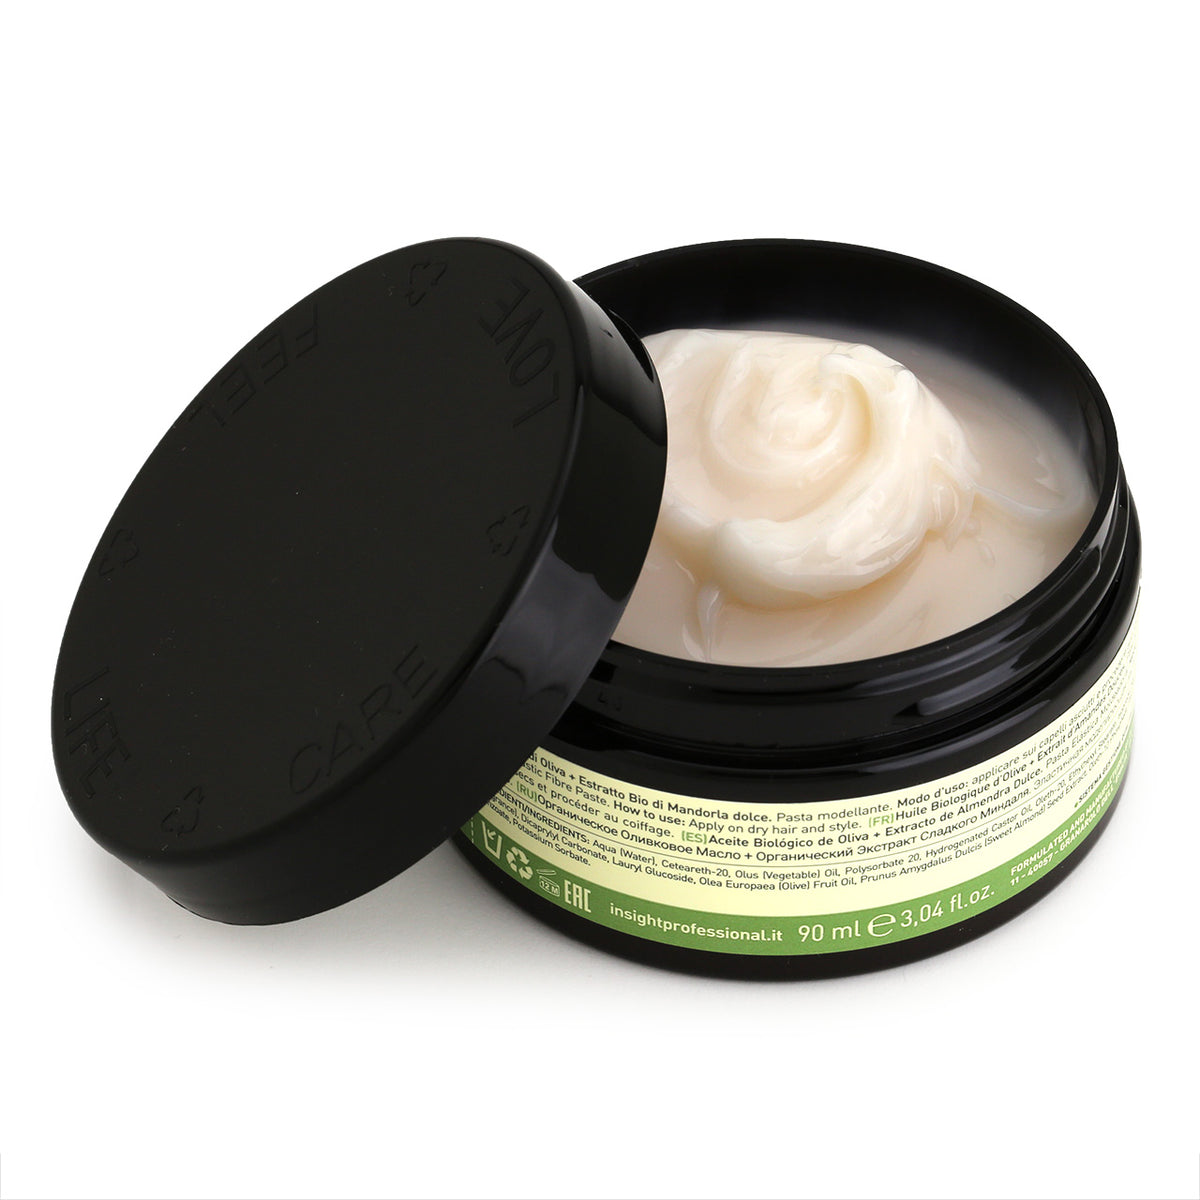 Insight Elastic Fibre Paste showing the open tub with white pliable pomade inside